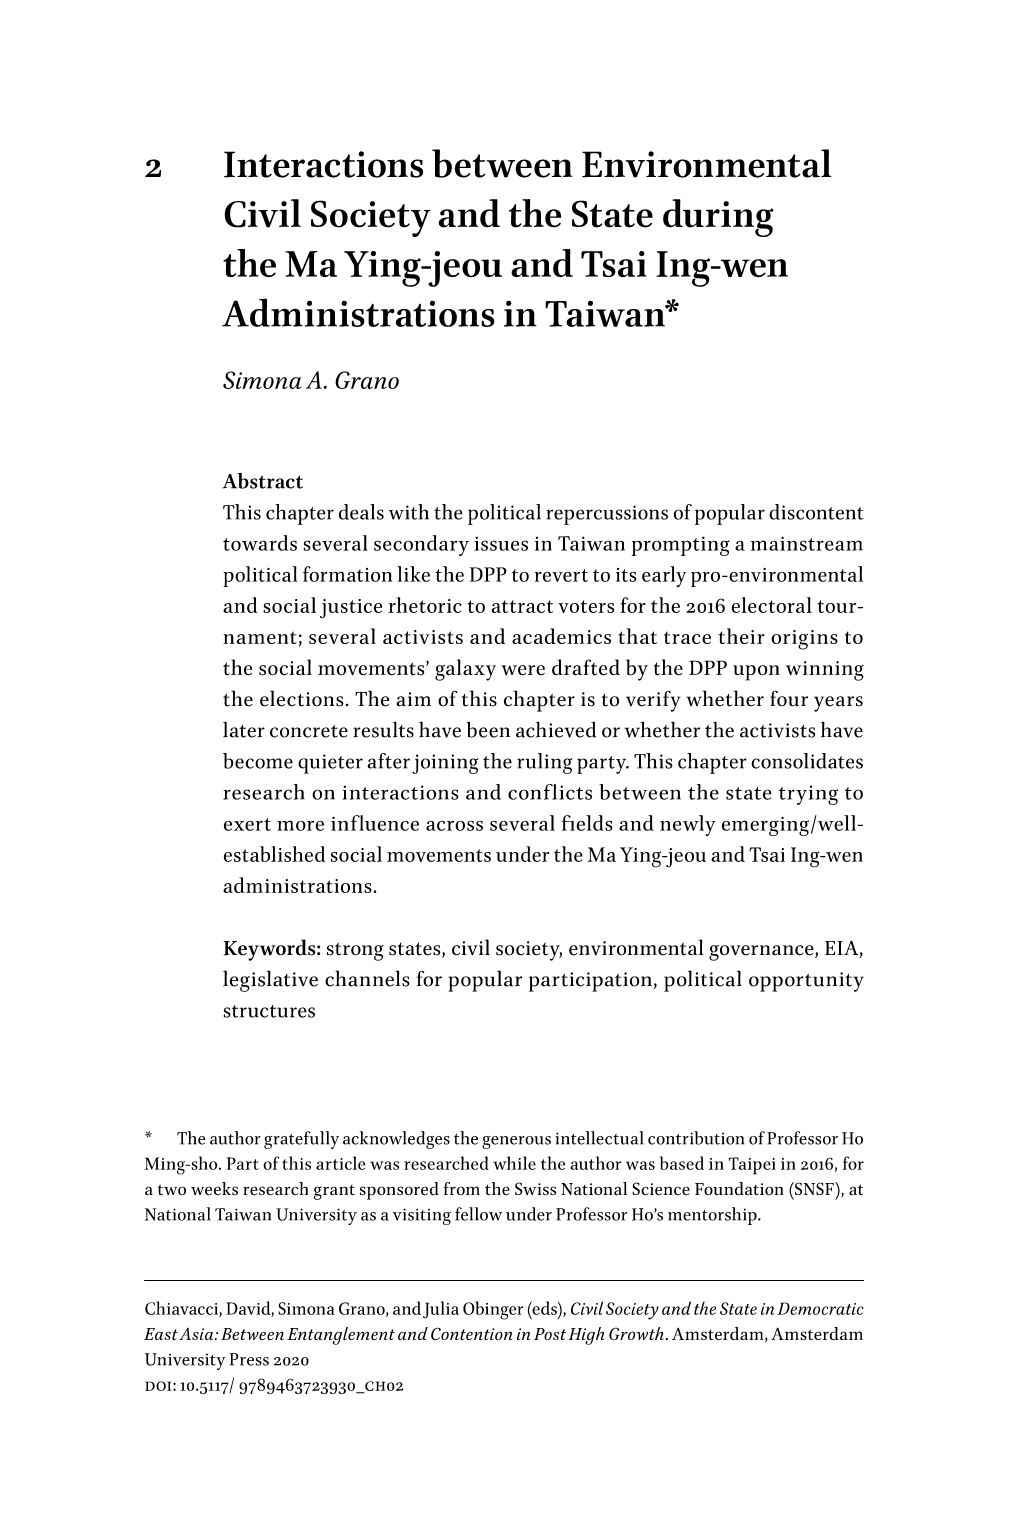 2 Interactions Between Environmental Civil Society and the State During the Ma Ying-Jeou and Tsai Ing-Wen Administrations In